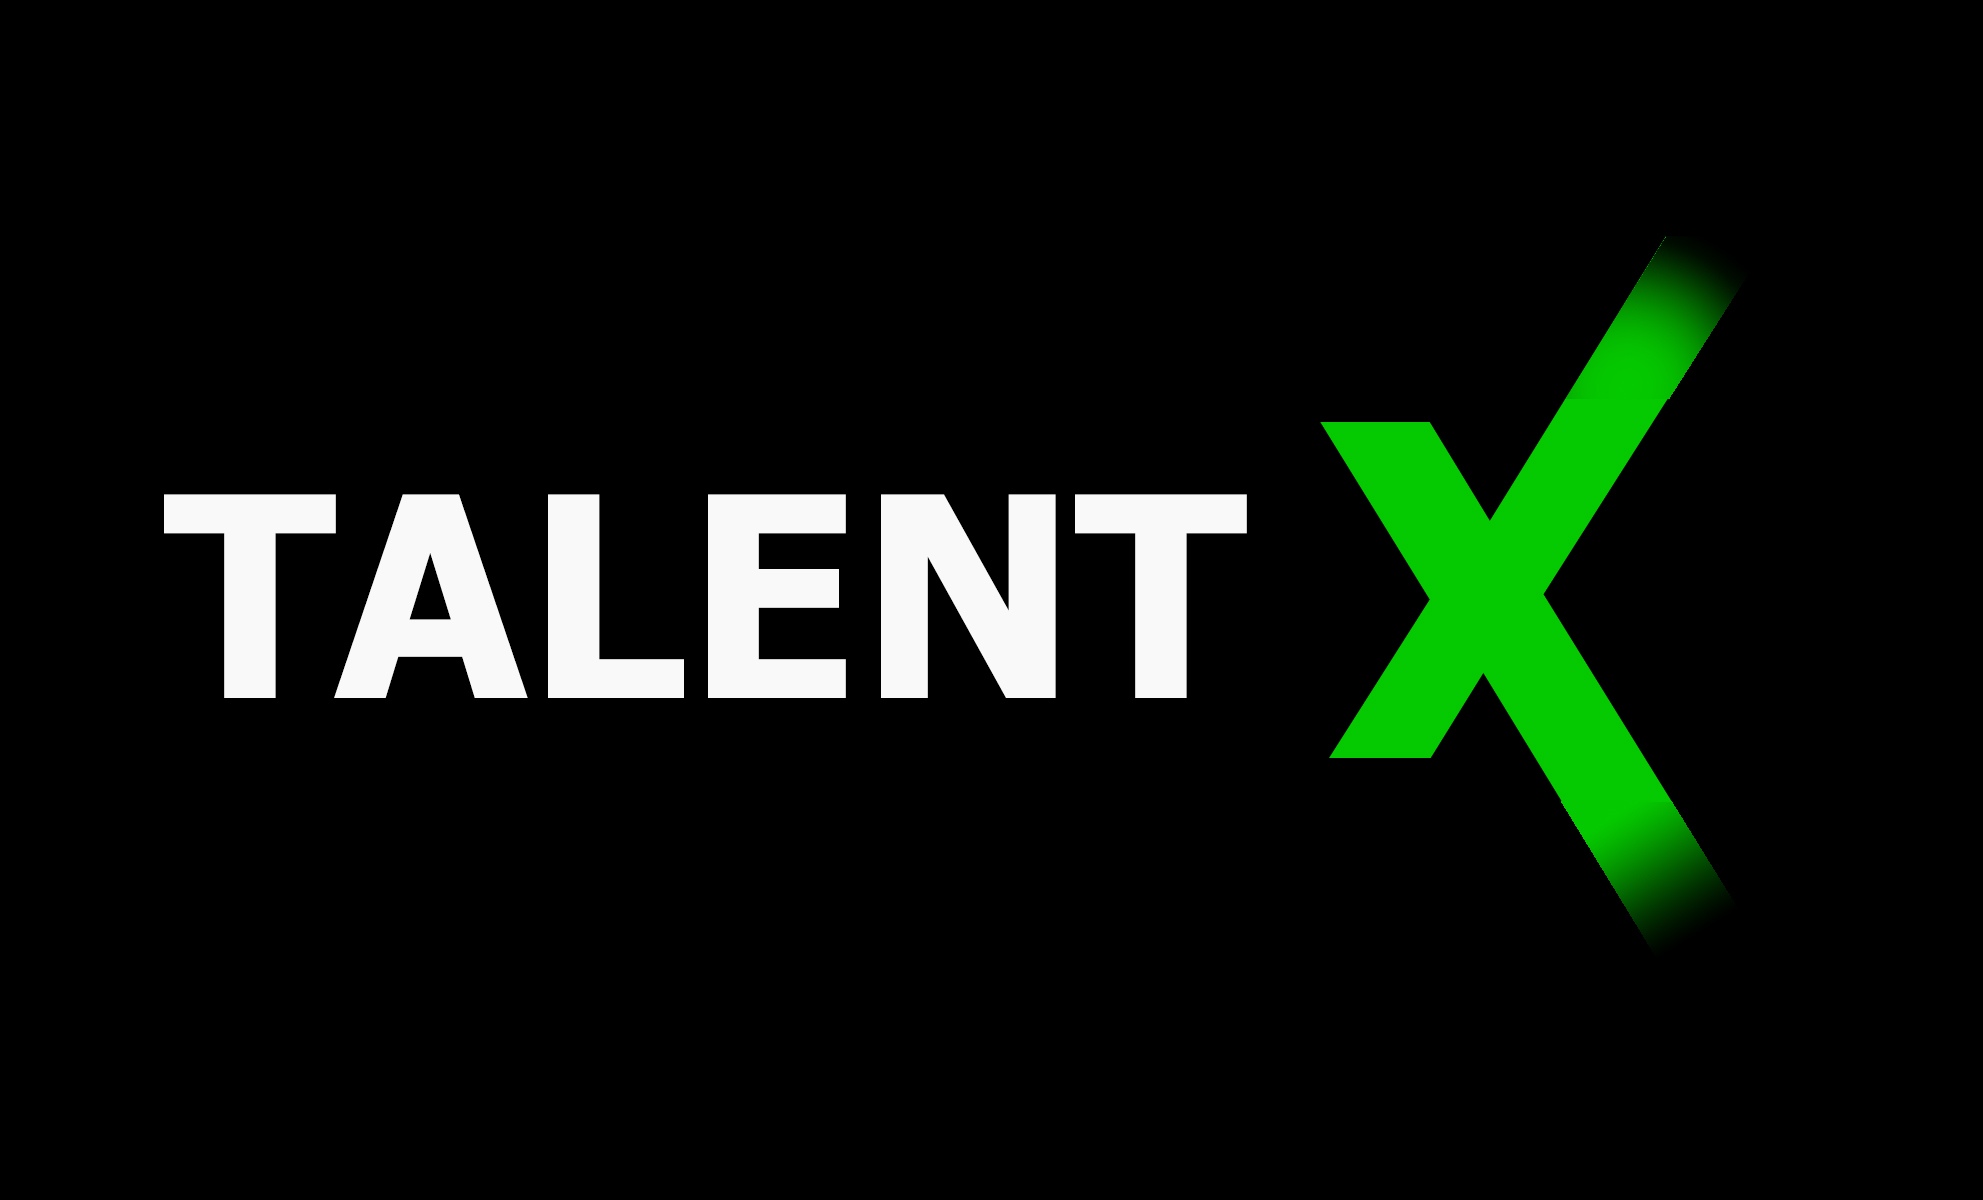 Talent X 2022 - A Solutions Focused Expo